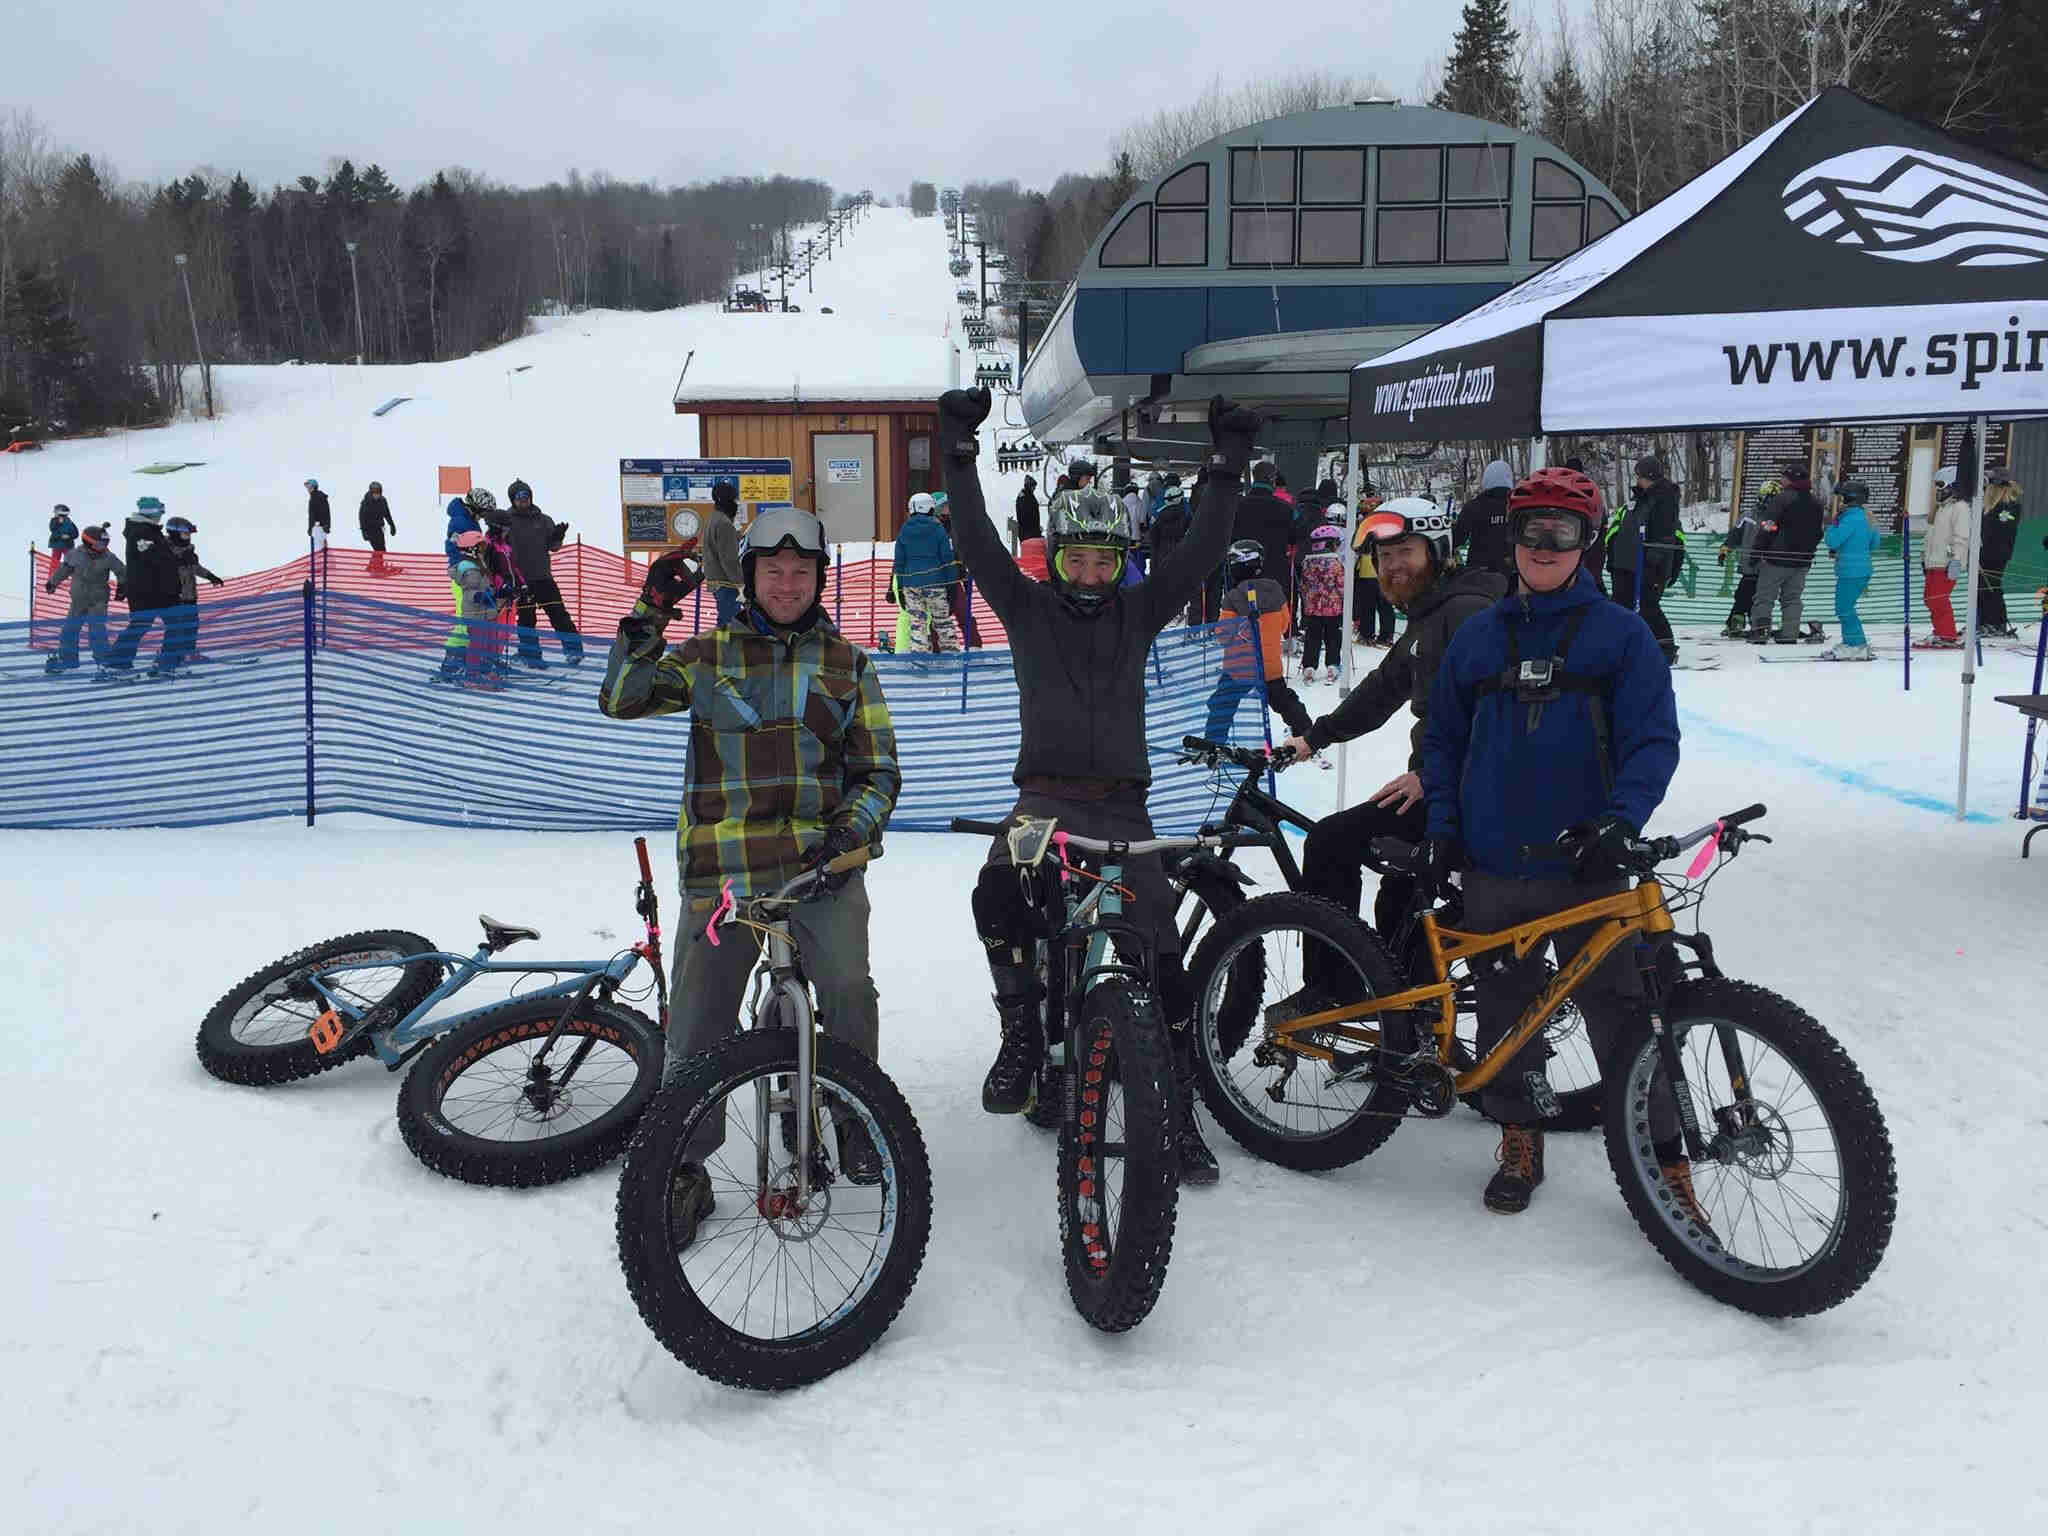 Front view of 3 cyclist on Surly Wednesday fat bikes, standing on snow at the base of a ski hill